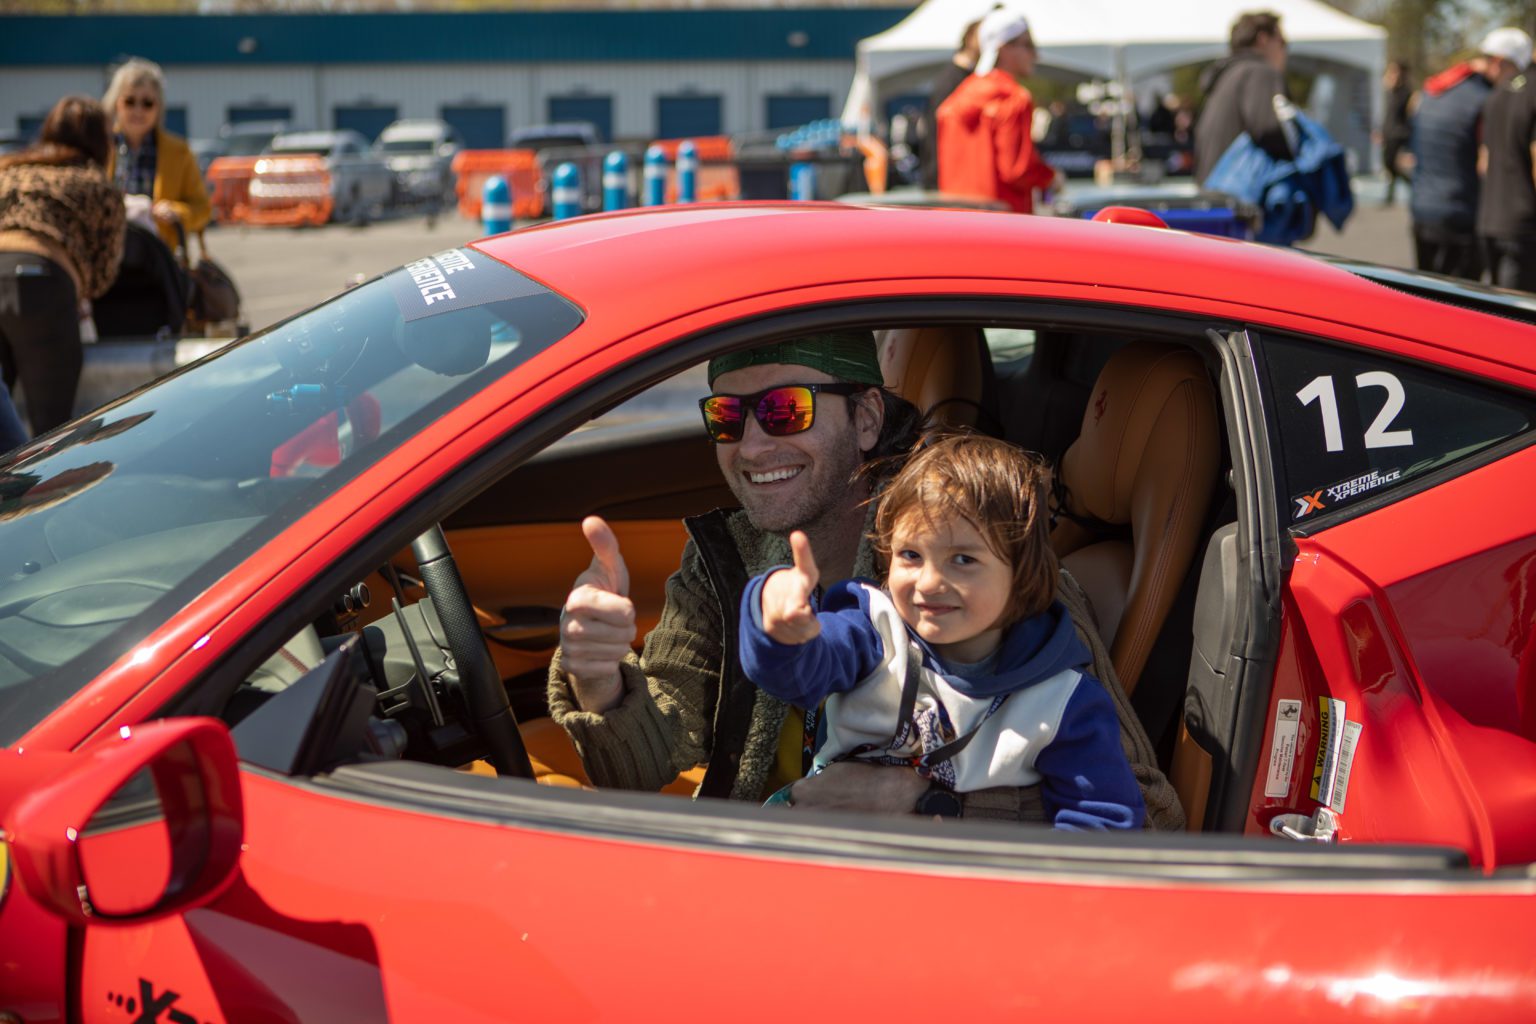 Father and son giving a thumbs up in the driver's seat of a supercar